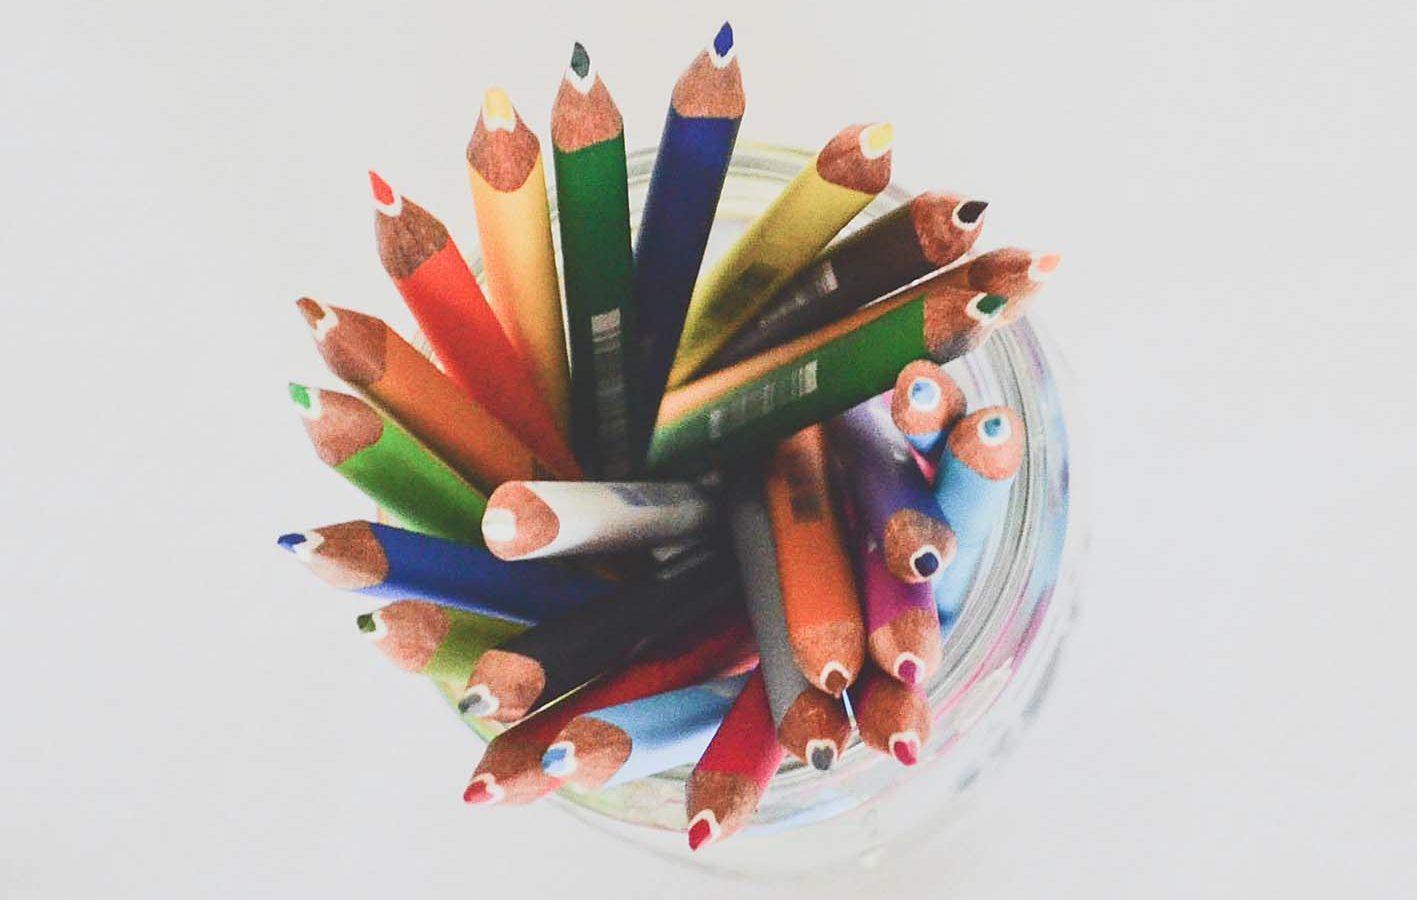 Different coloured pencils in a glass jar, viewed from above